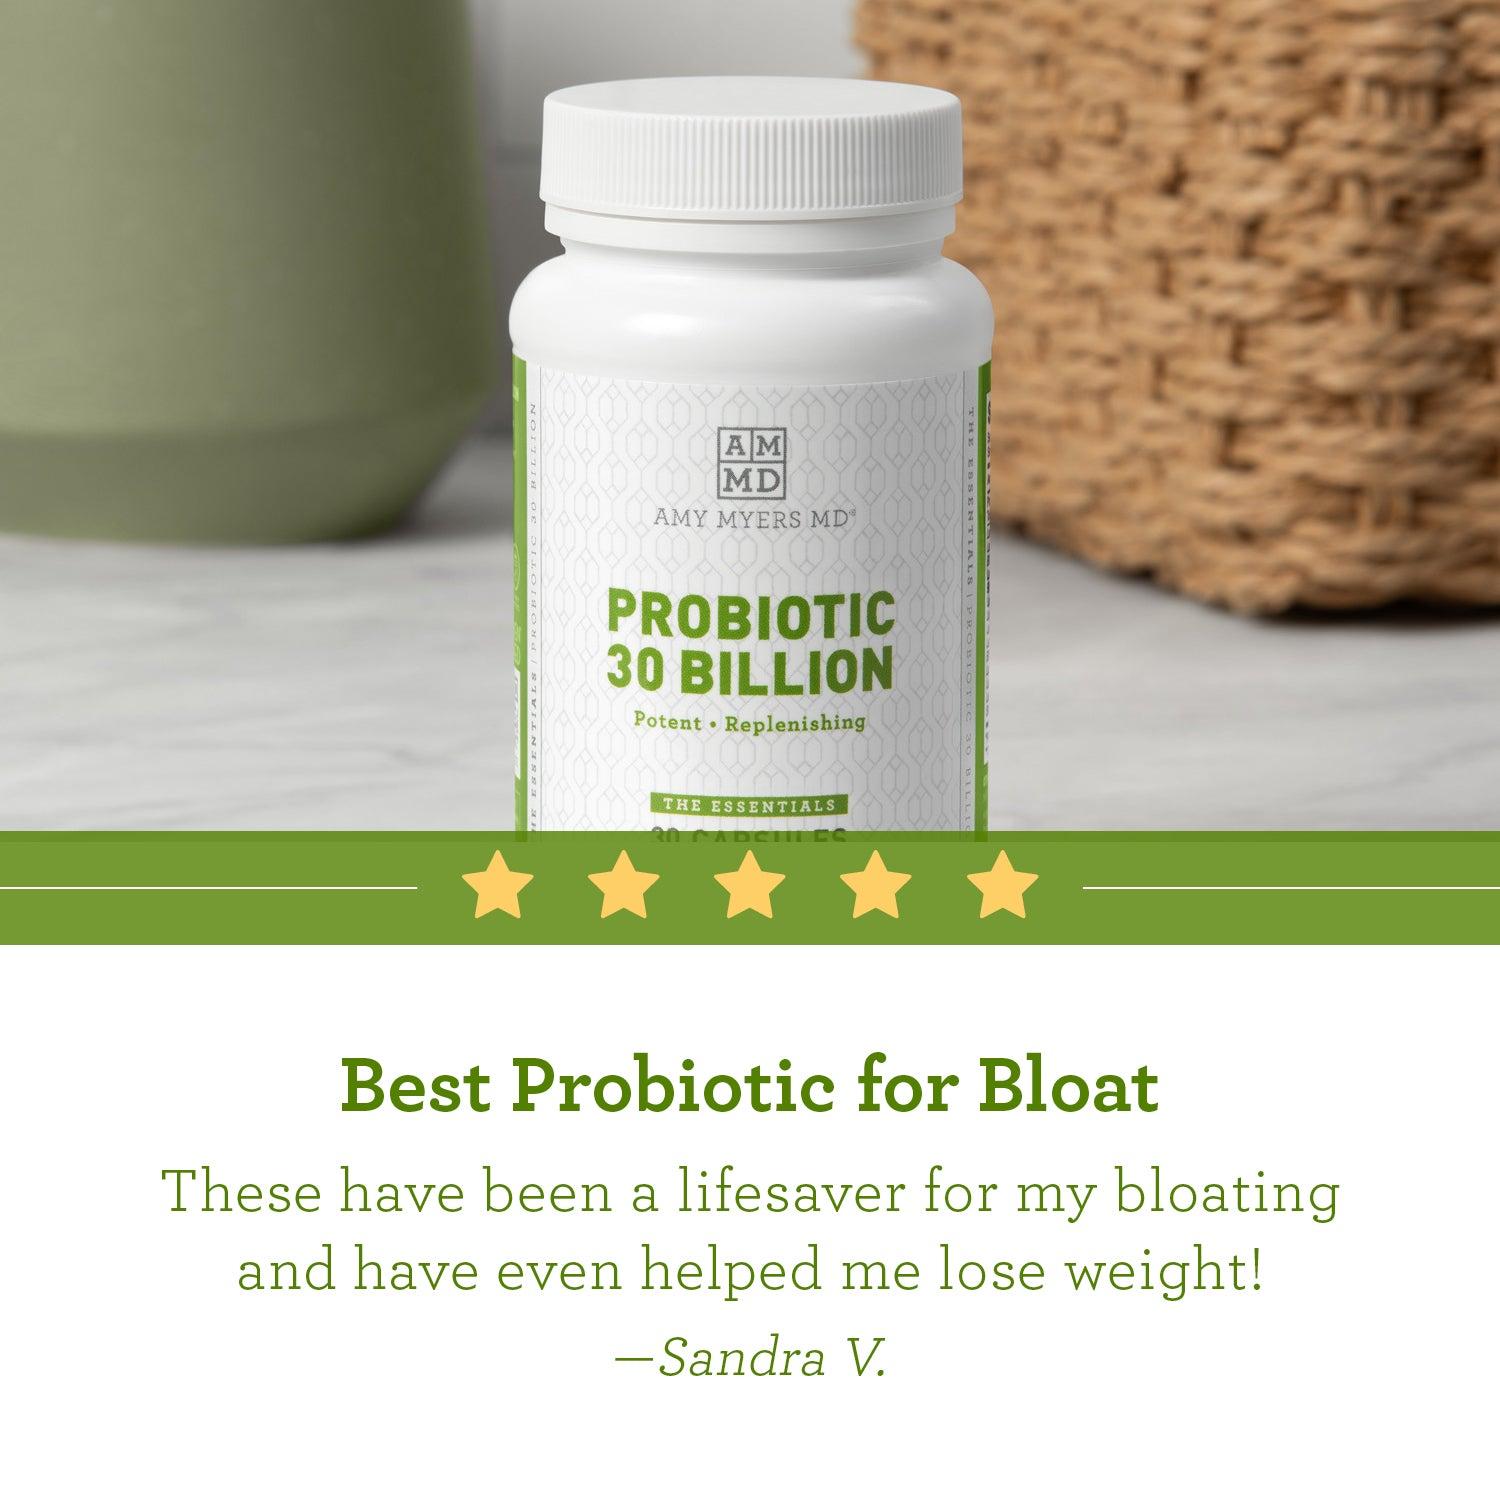 Picture of probiotic 30 billion capsule bottle with a review, "Best probiotic for bloat, These have been a lifesaver for my bloating and have even helped me lose weight!" - Sandra V. 